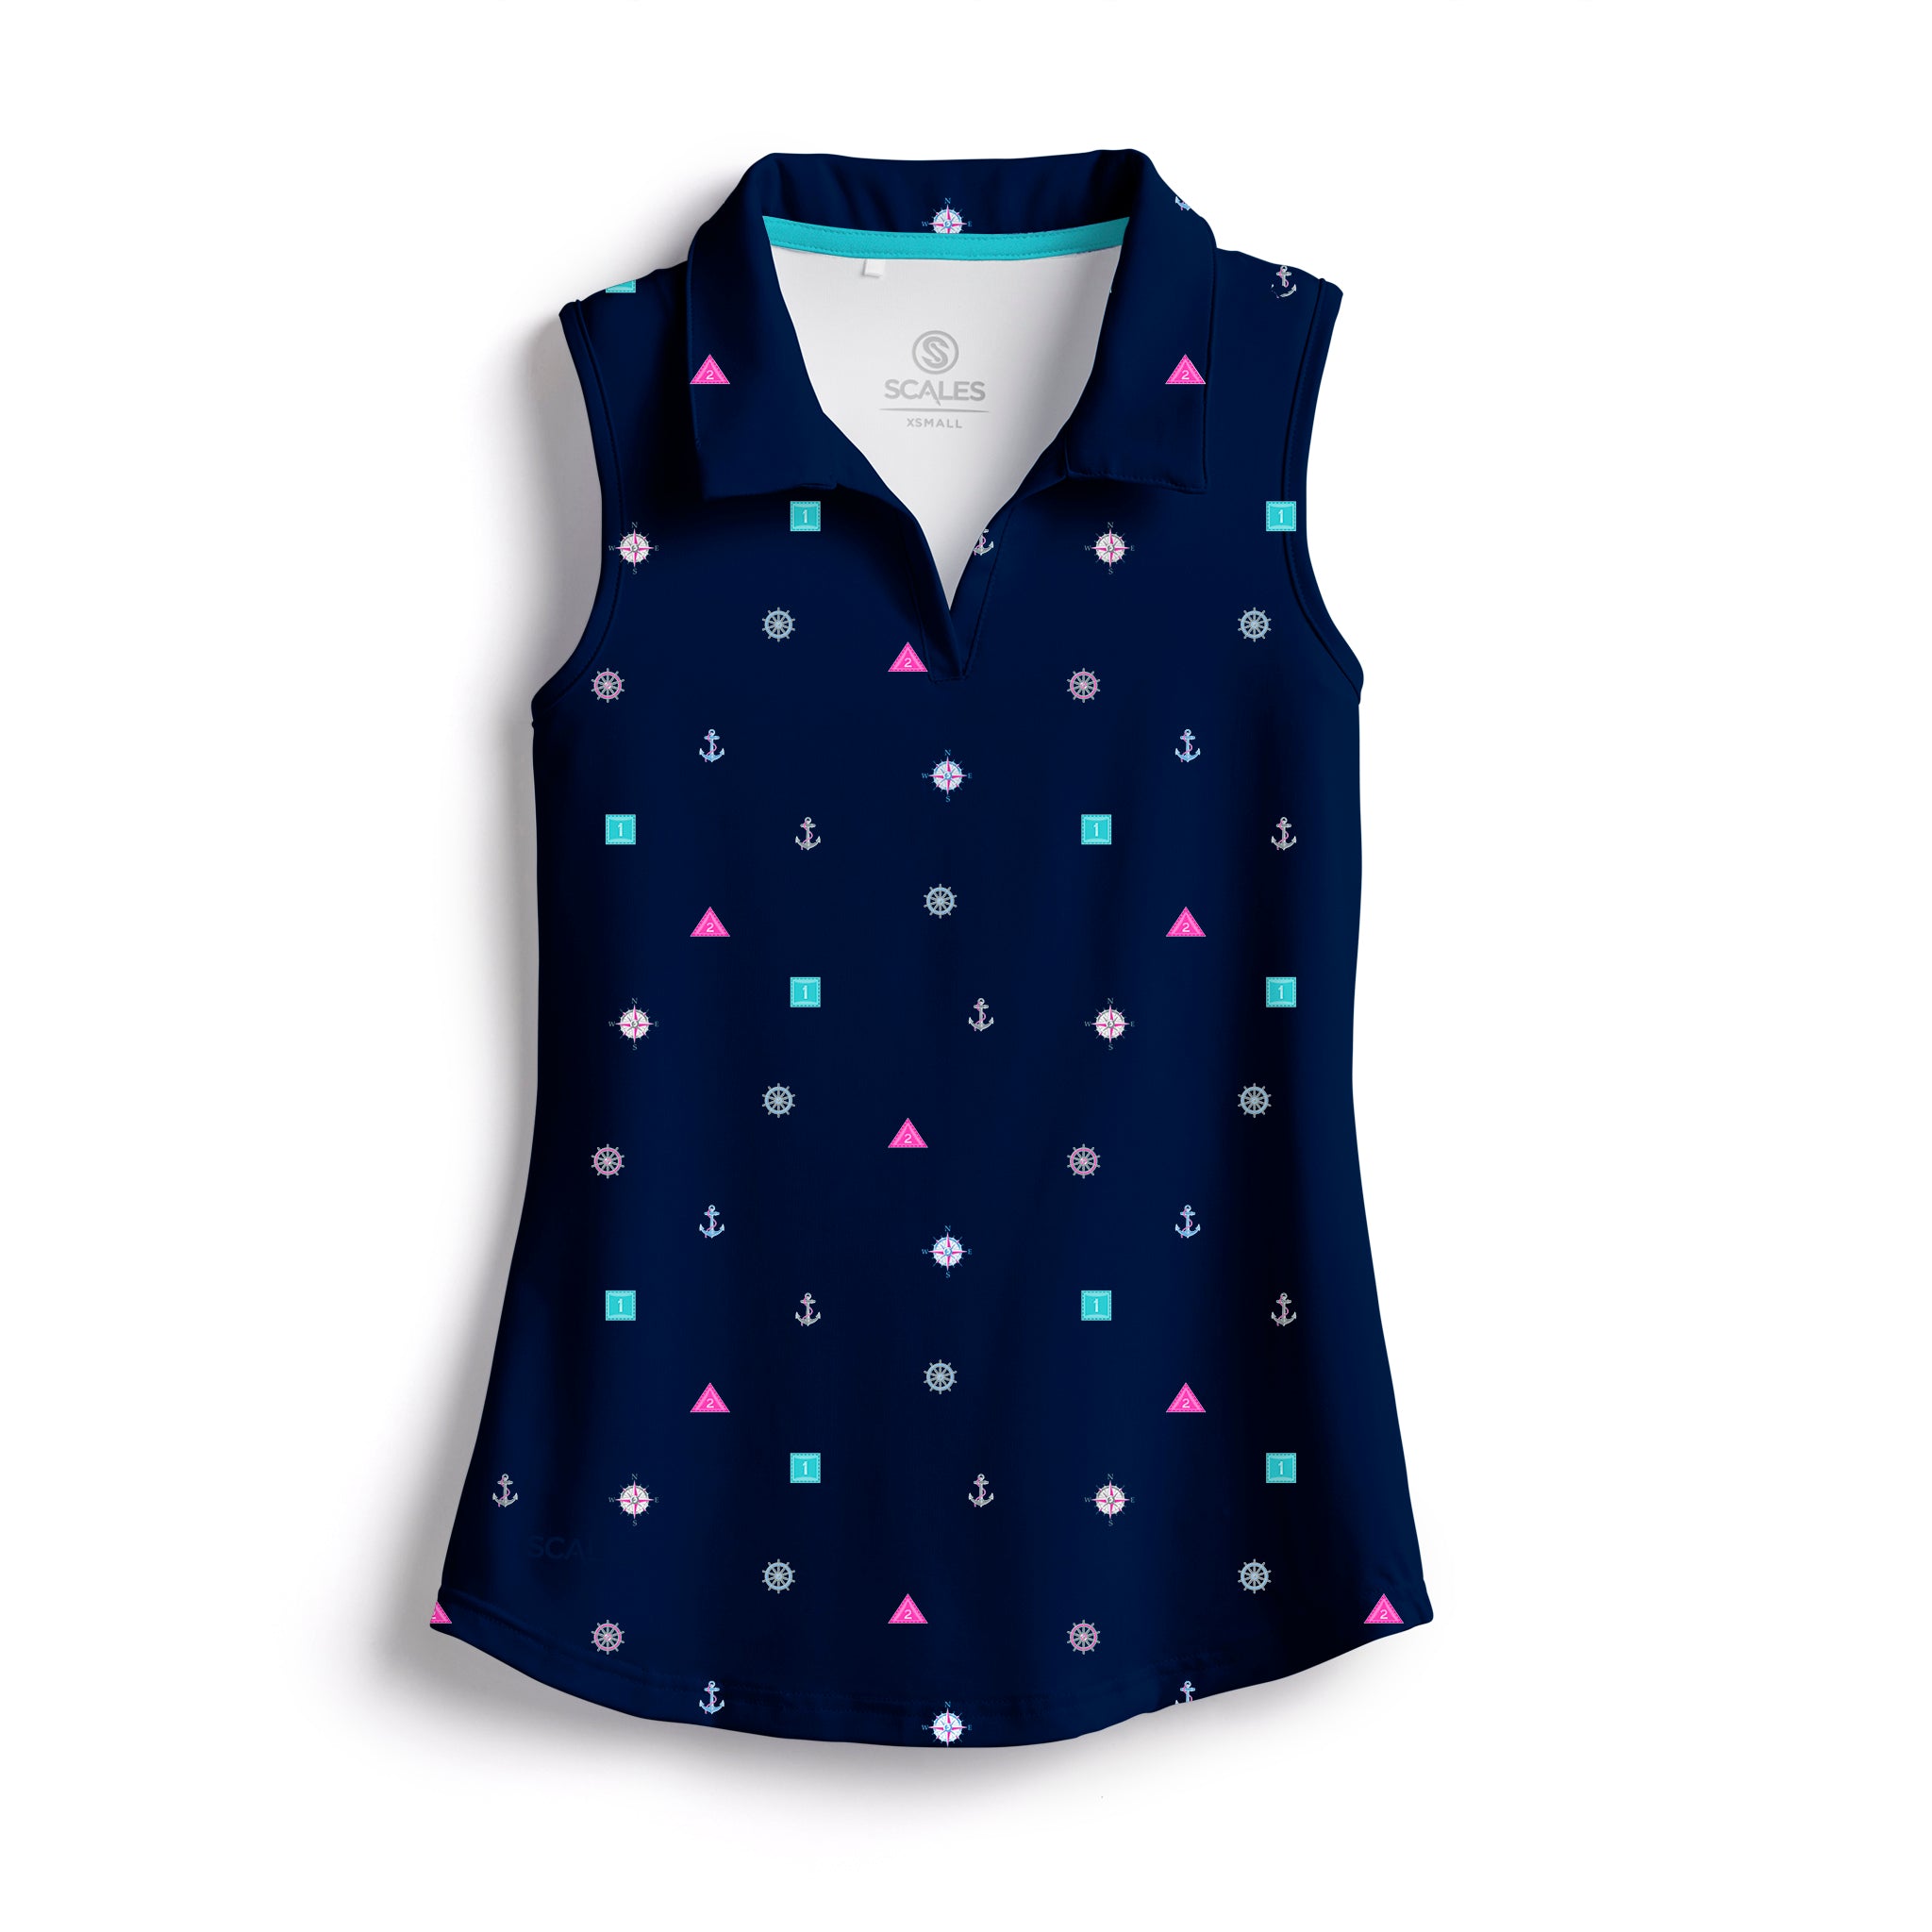 Scales Qualified Womens Sleeveless Polo in Navy Size XS